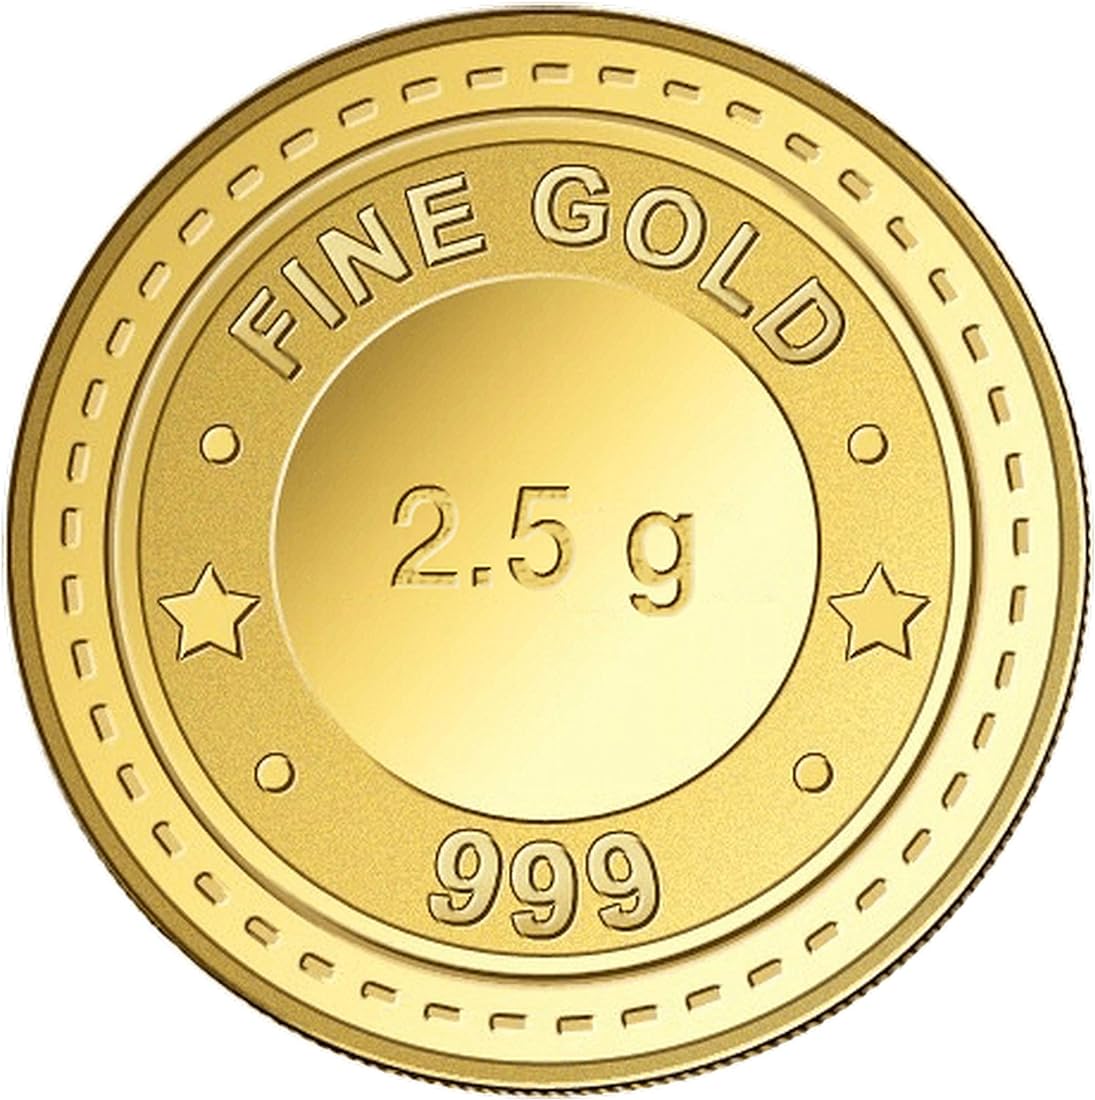 G-Coin® | A new way to own gold | Responsible Gold